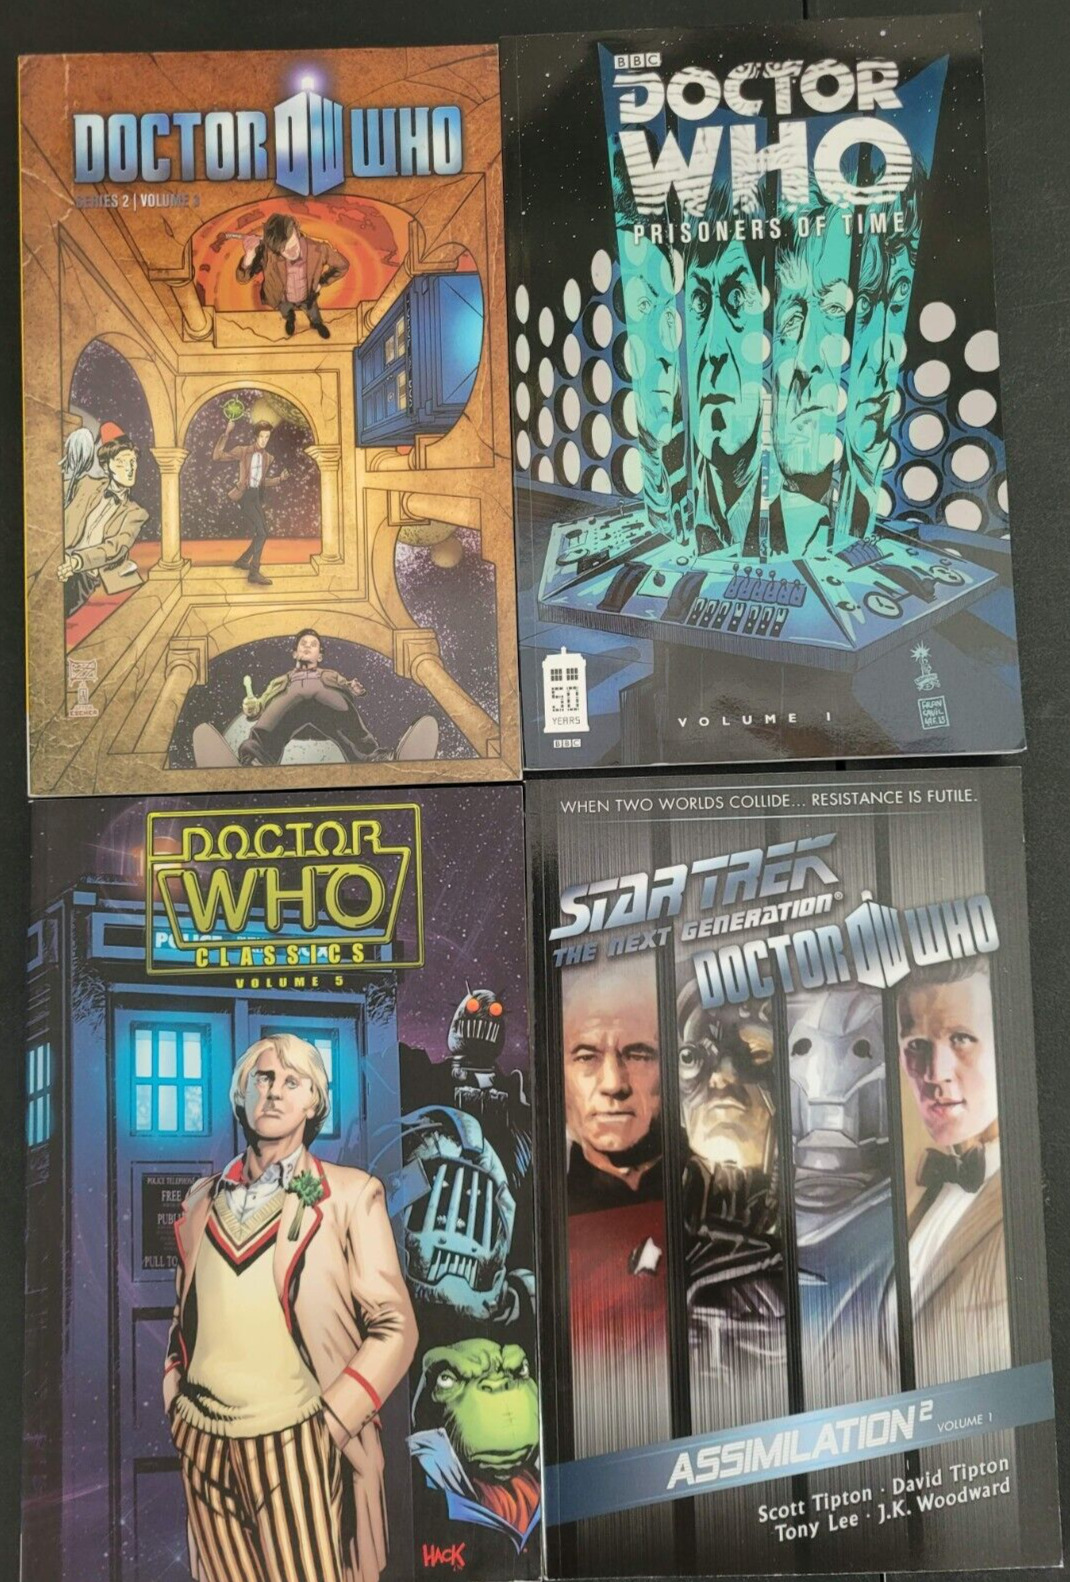 DOCTOR WHO SET OF 7 TPB/GRAPHIC NOVEL/BOOK IDW COMICS 13TH DOCTOR'S GUIDE+